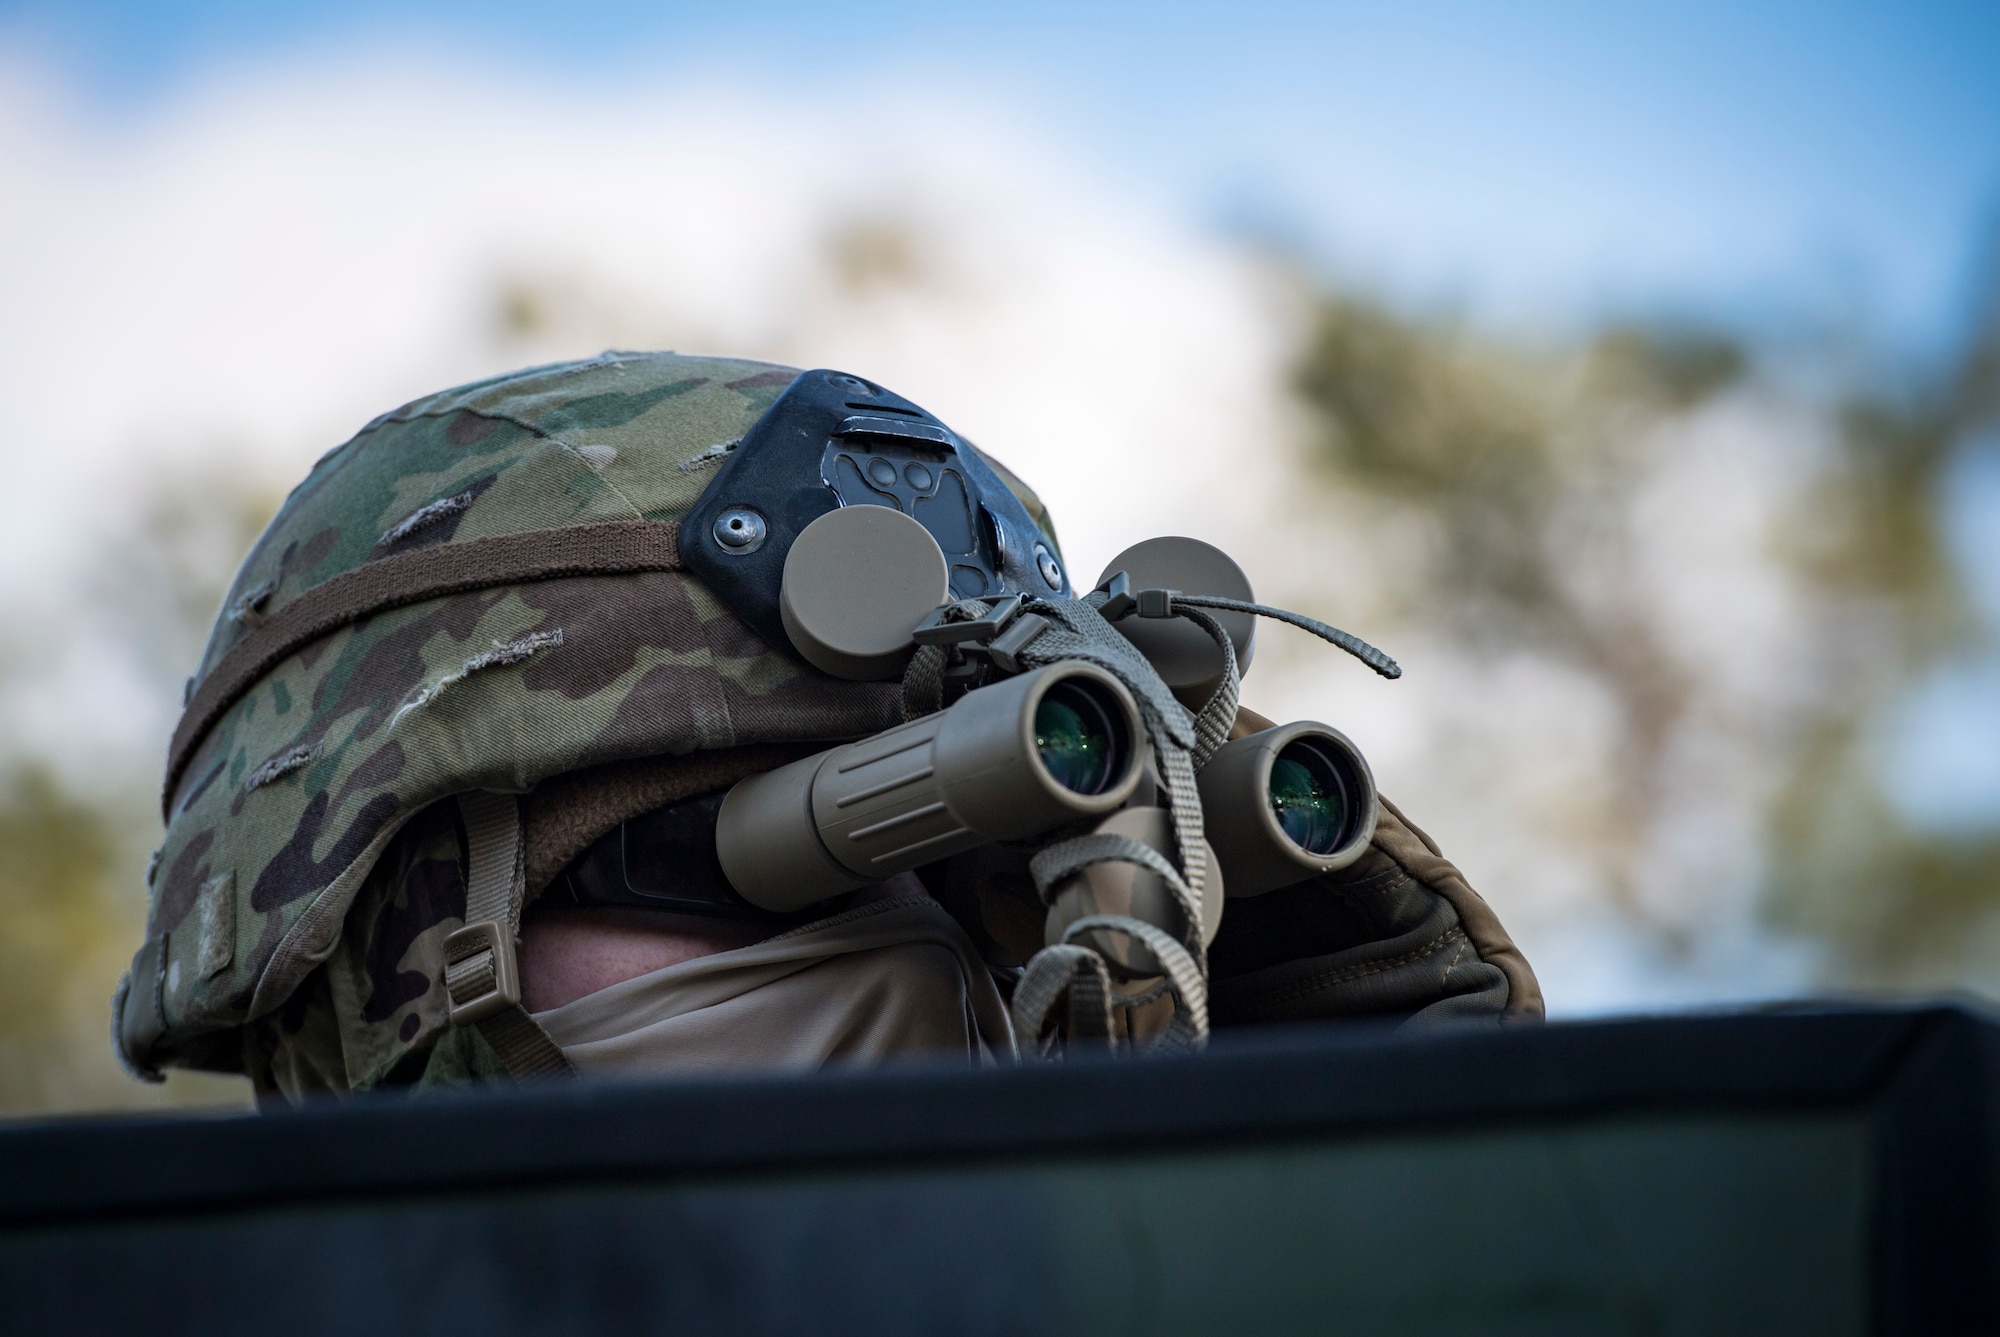 An Airman from the 824th Base Defense Squadron watches a threat during a Mission Readiness Exercise, March 16, 2018, at Joint Base McGuire-Dix Lakehurst, N.J. Evaluators tested the 824th BDS from Moody Air Force Base, Ga., and the 105th Security Forces Squadron from Stewart Air National Guard Base, N.Y., to ensure their combat readiness. (U.S. Air Force photo by Senior Airman Janiqua P. Robinson)